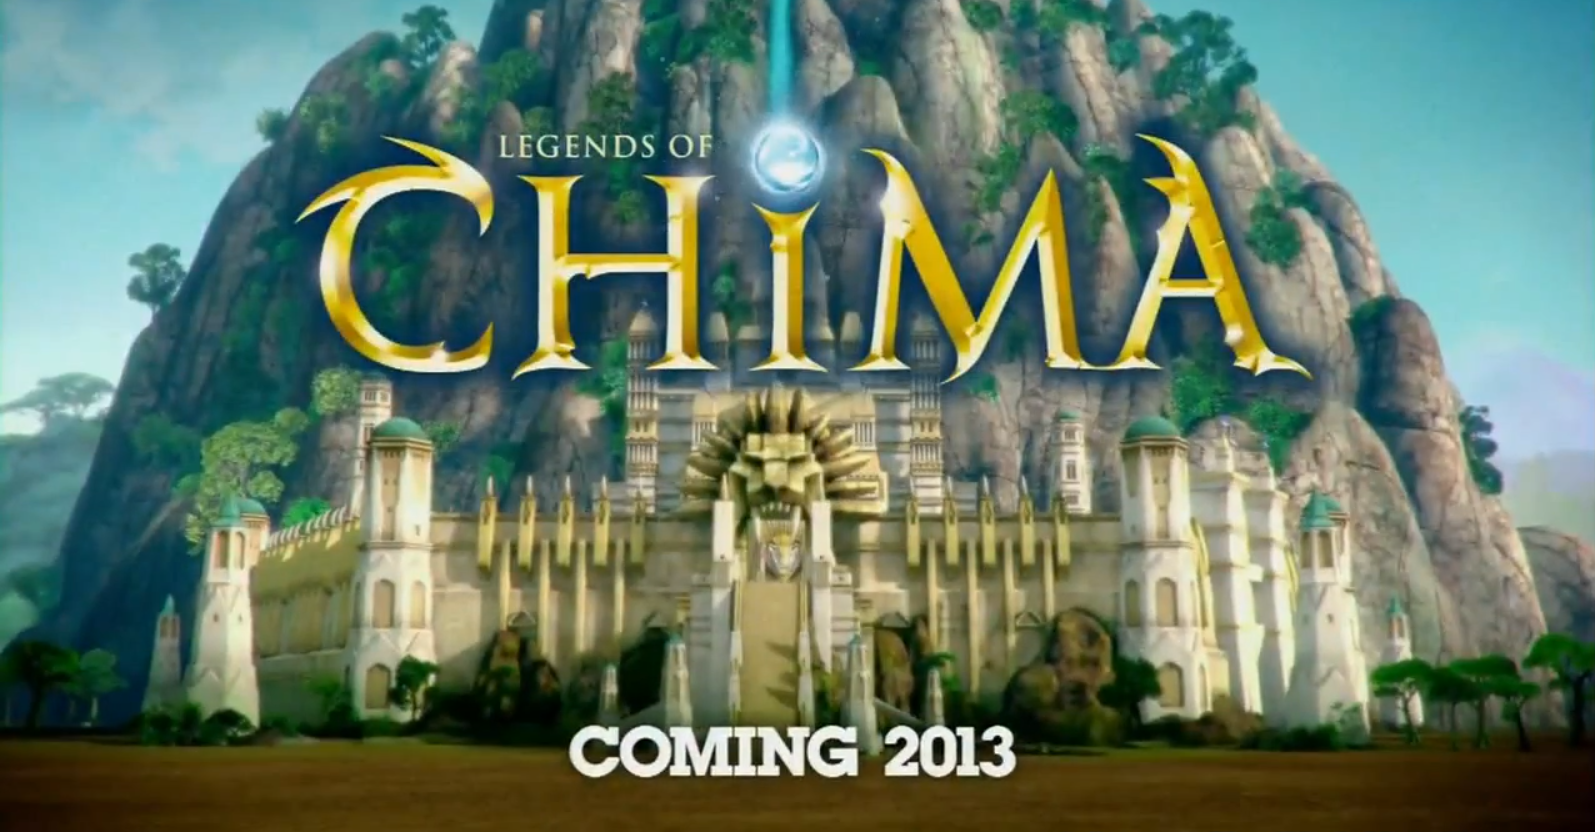 Legends of Chima: The Animated Series - Brickipedia, the LEGO Wiki